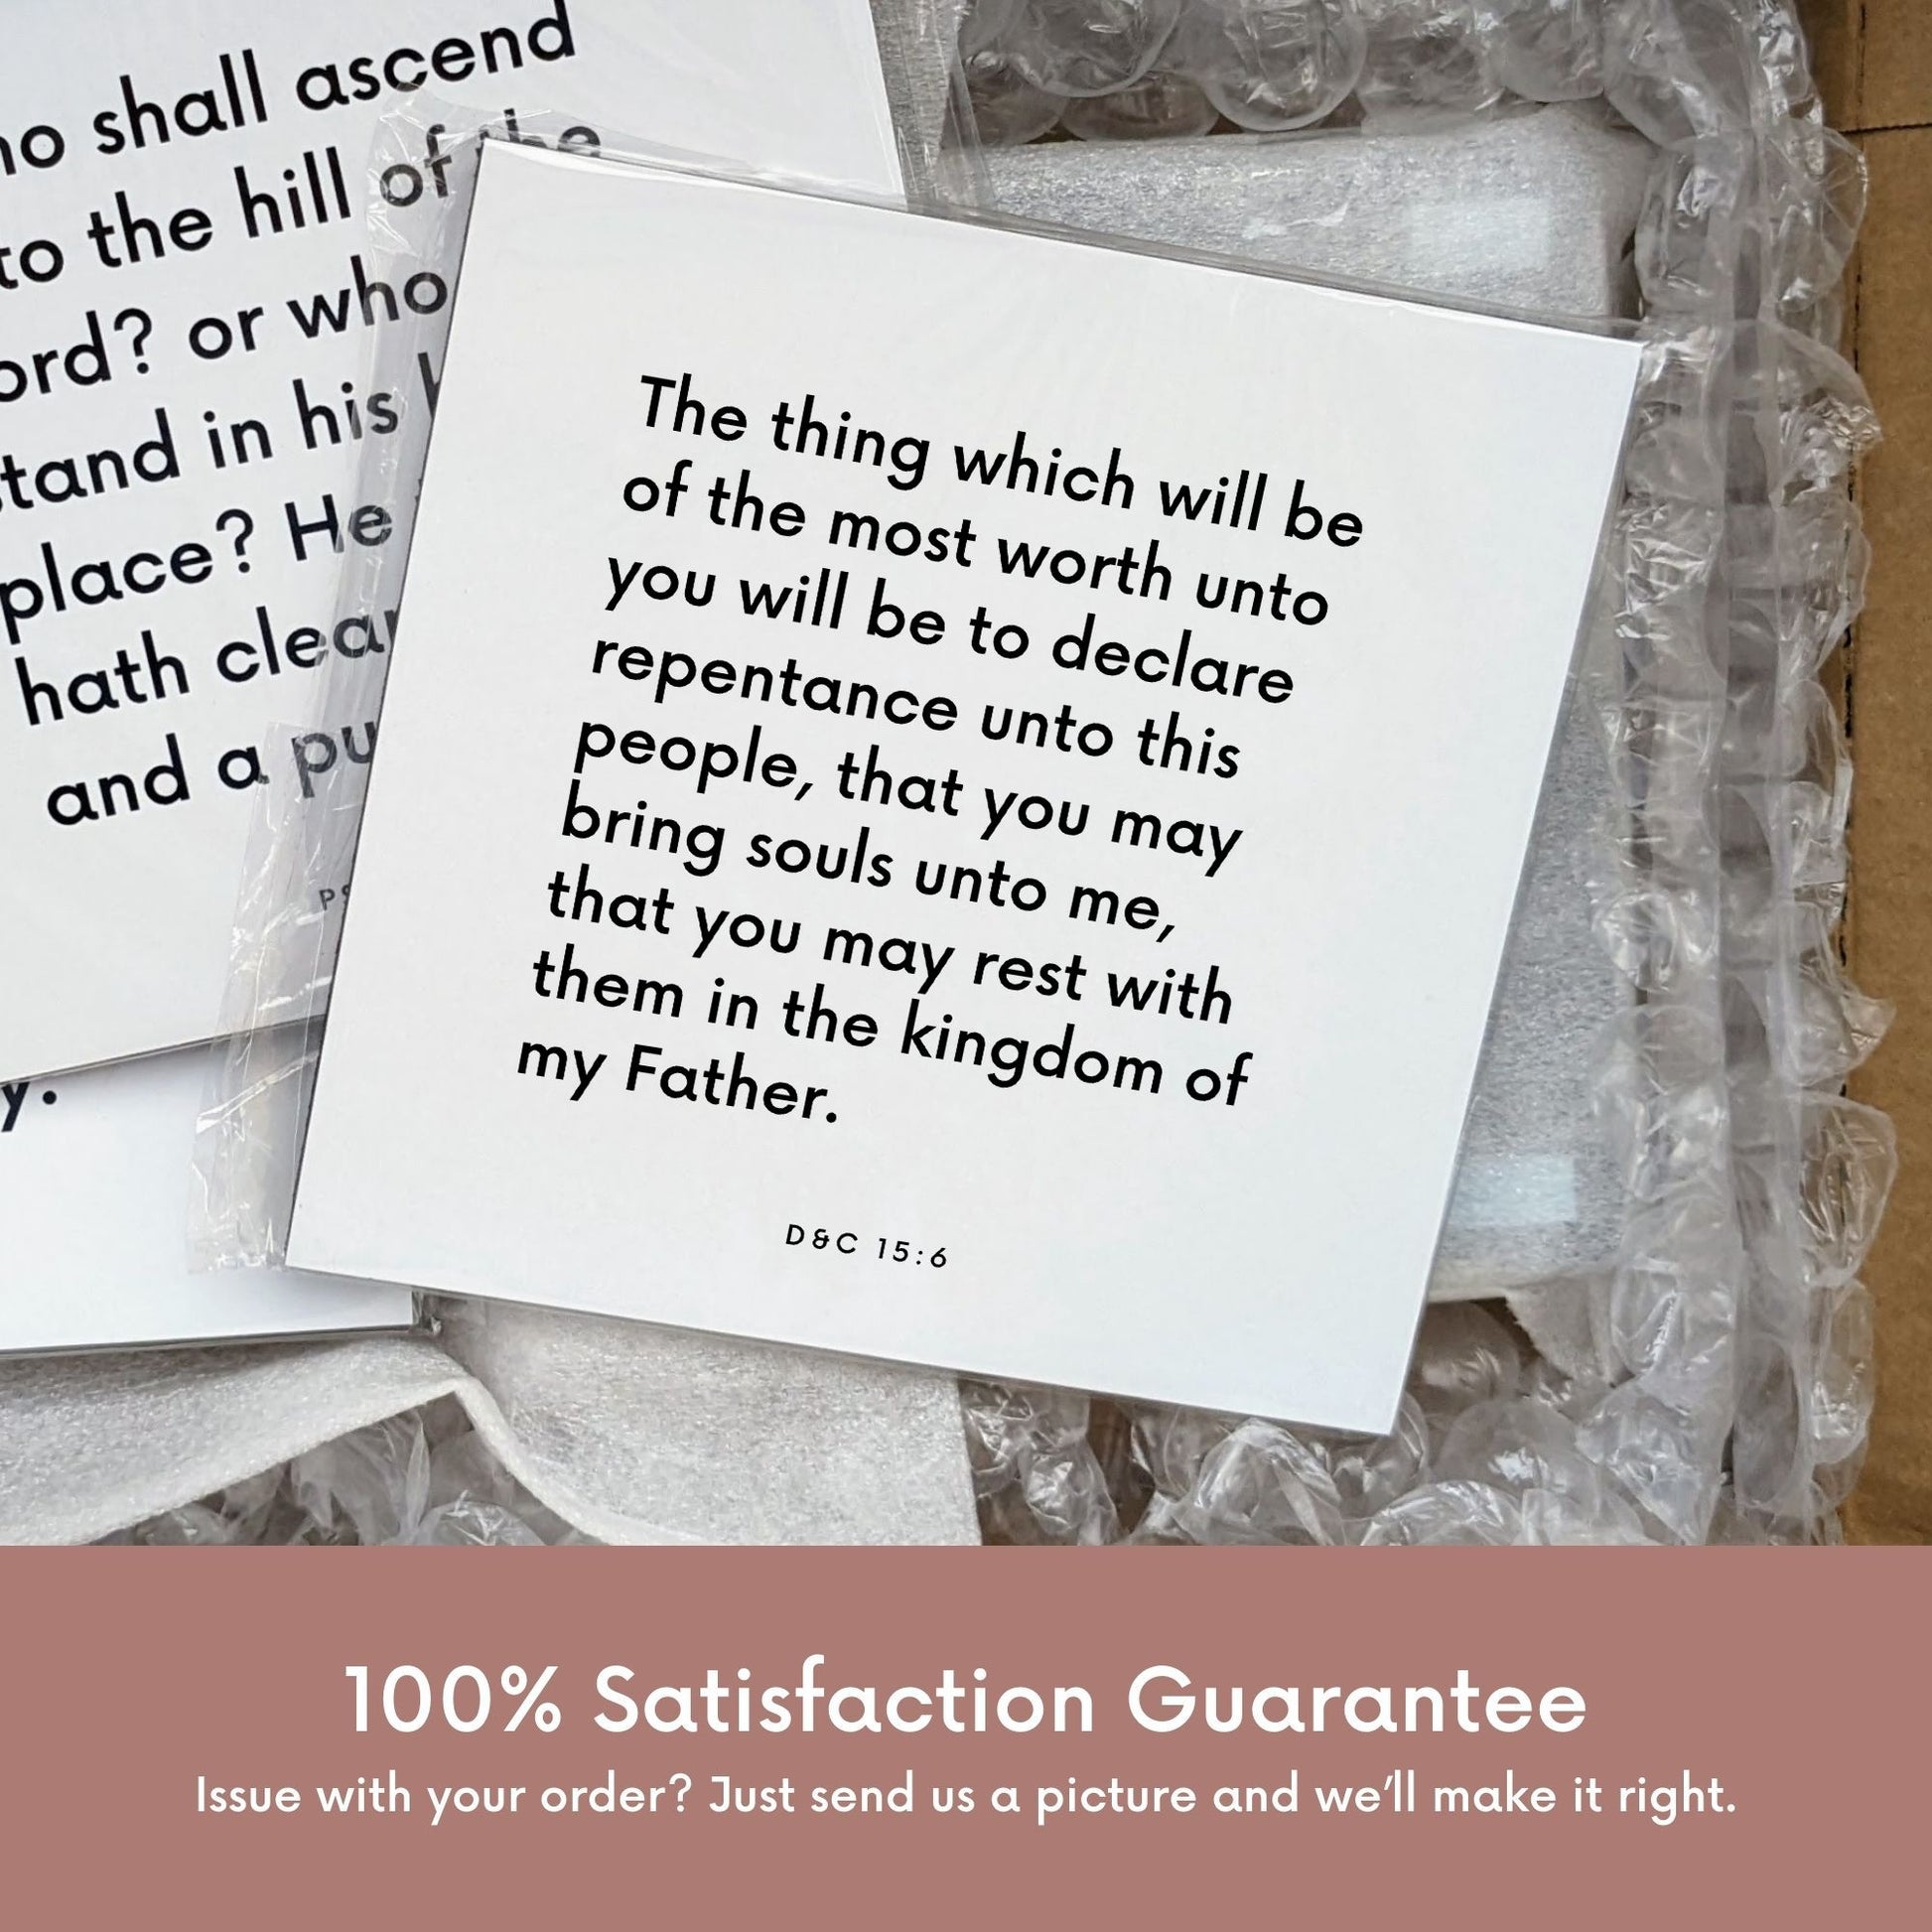 Shipping materials for scripture tile of D&C 15:6 - "The thing which will be of the most worth unto you"